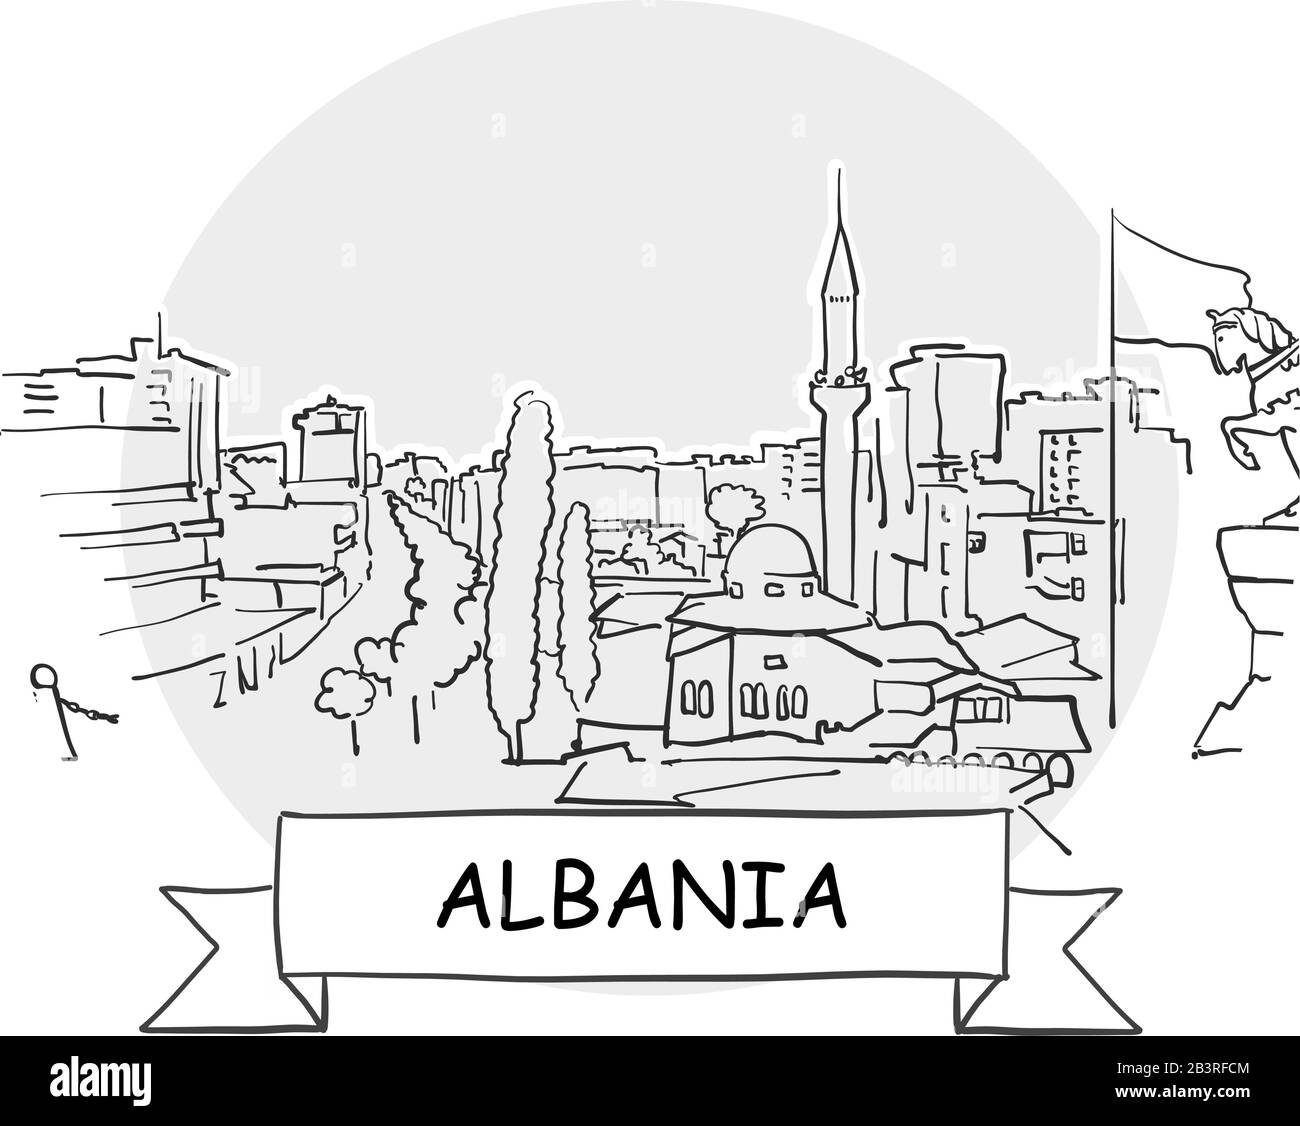 Albania Hand-Drawn Urban Vector Sign. Black Line Art Illustration with Ribbon and Title. Stock Vector